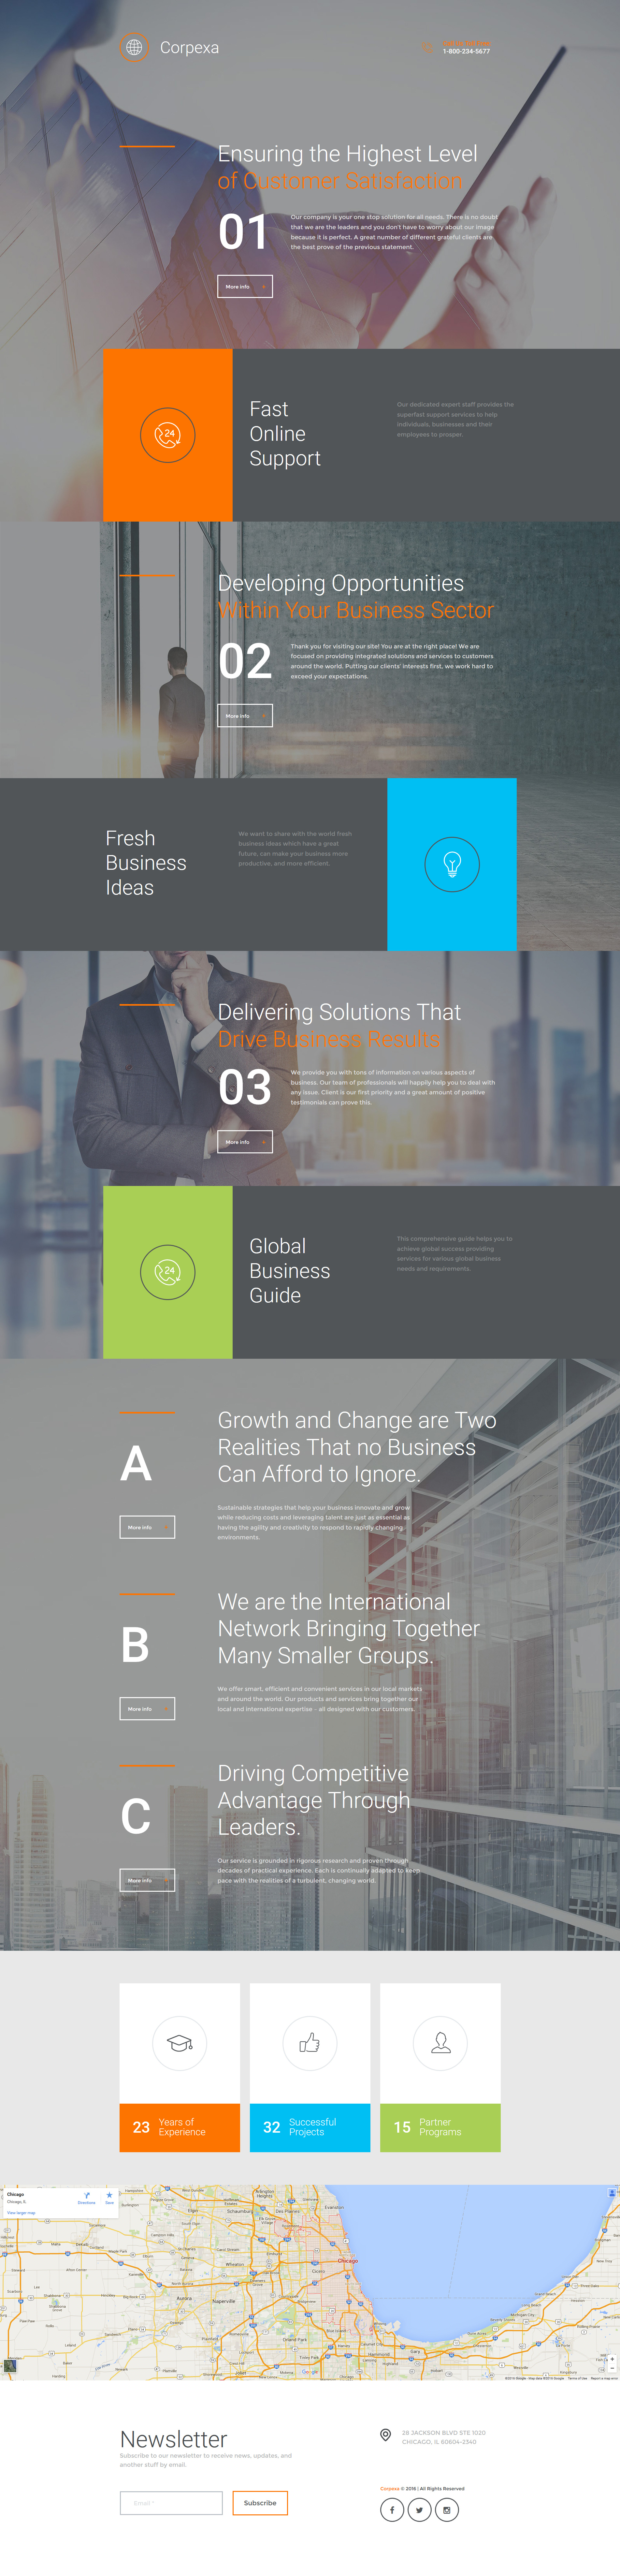 Business & Services Moto CMS 3 Template